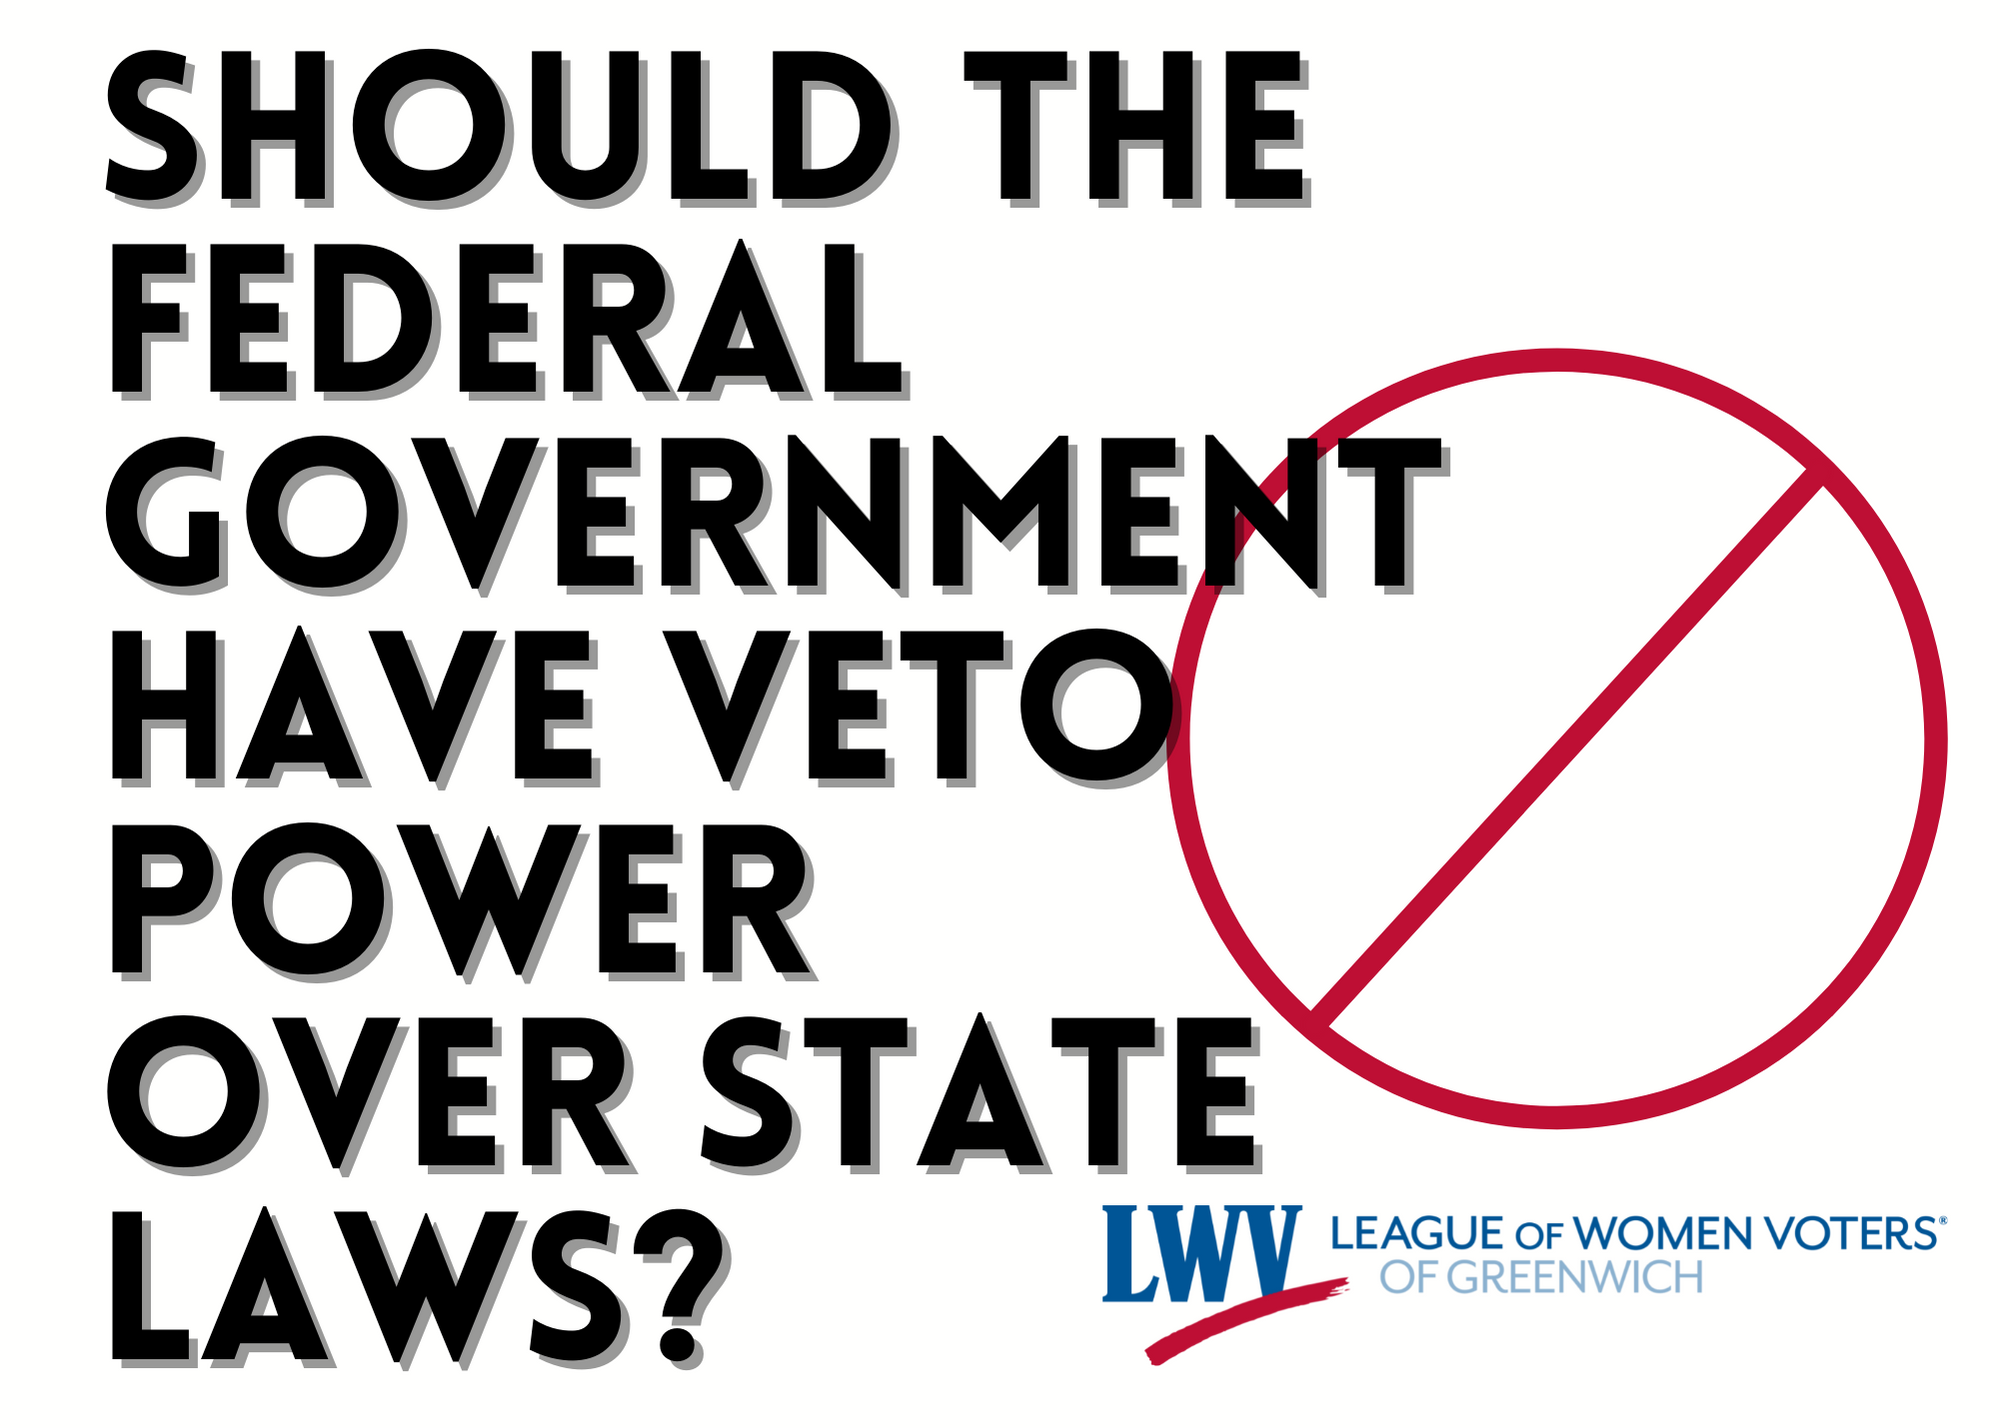 Should the Federal Government Have Veto Power Over State Laws?